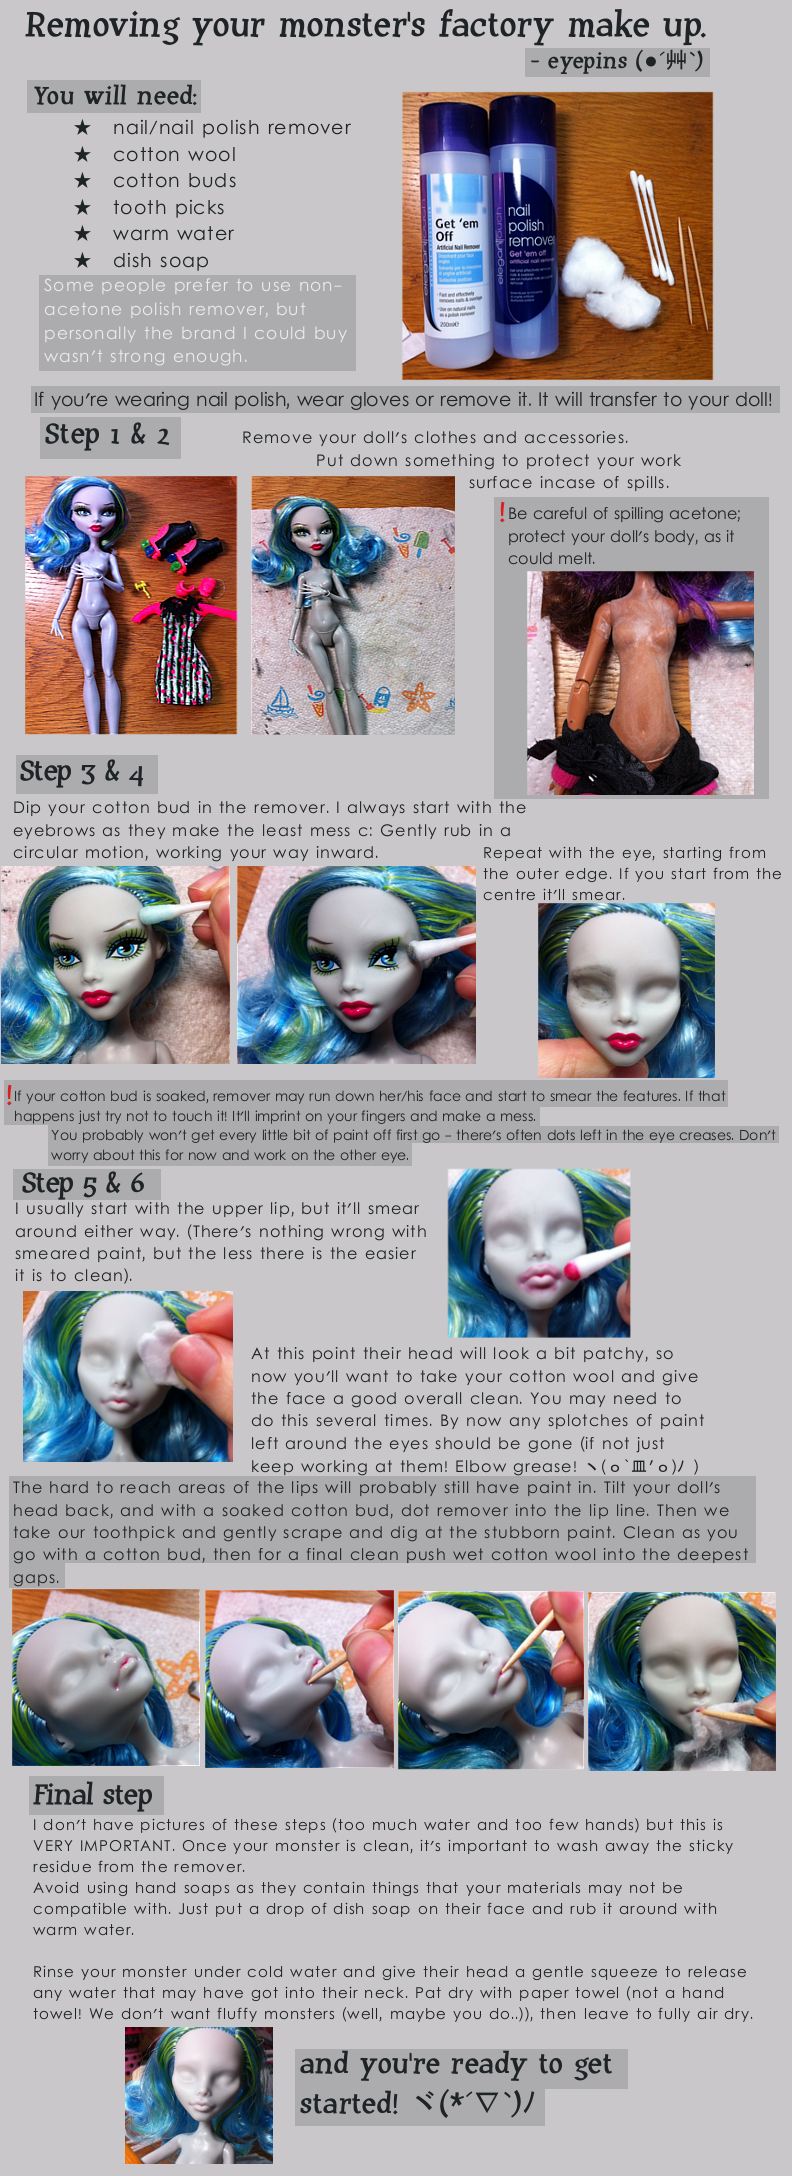 How To Remove Monster High Factory Paint By Eyepins On DeviantArt